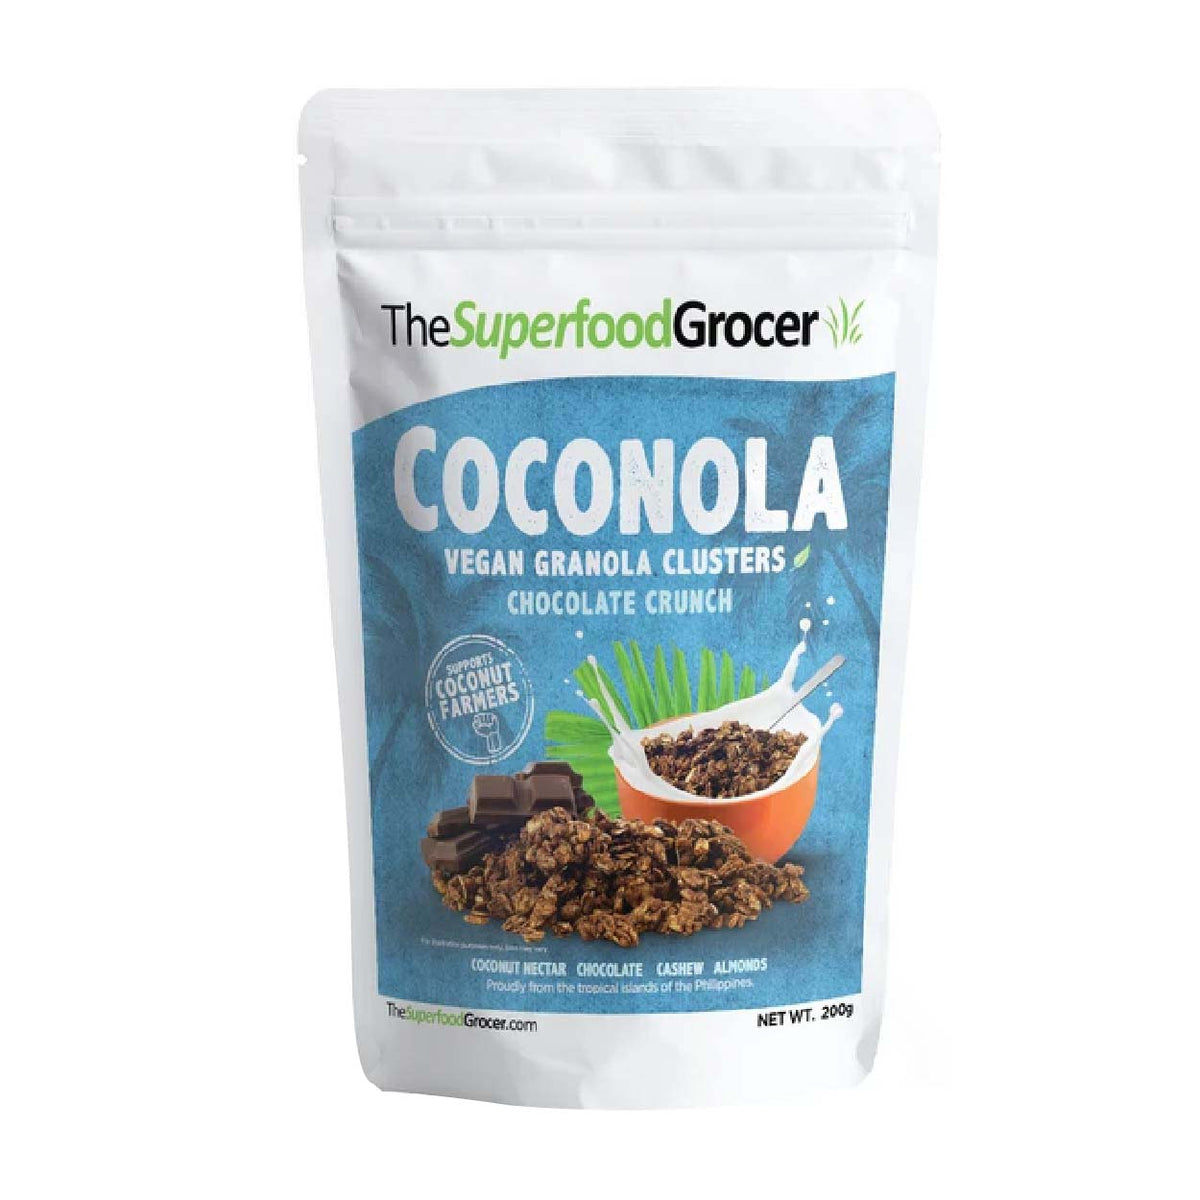 The Superfood Grocer Coconola Cereal